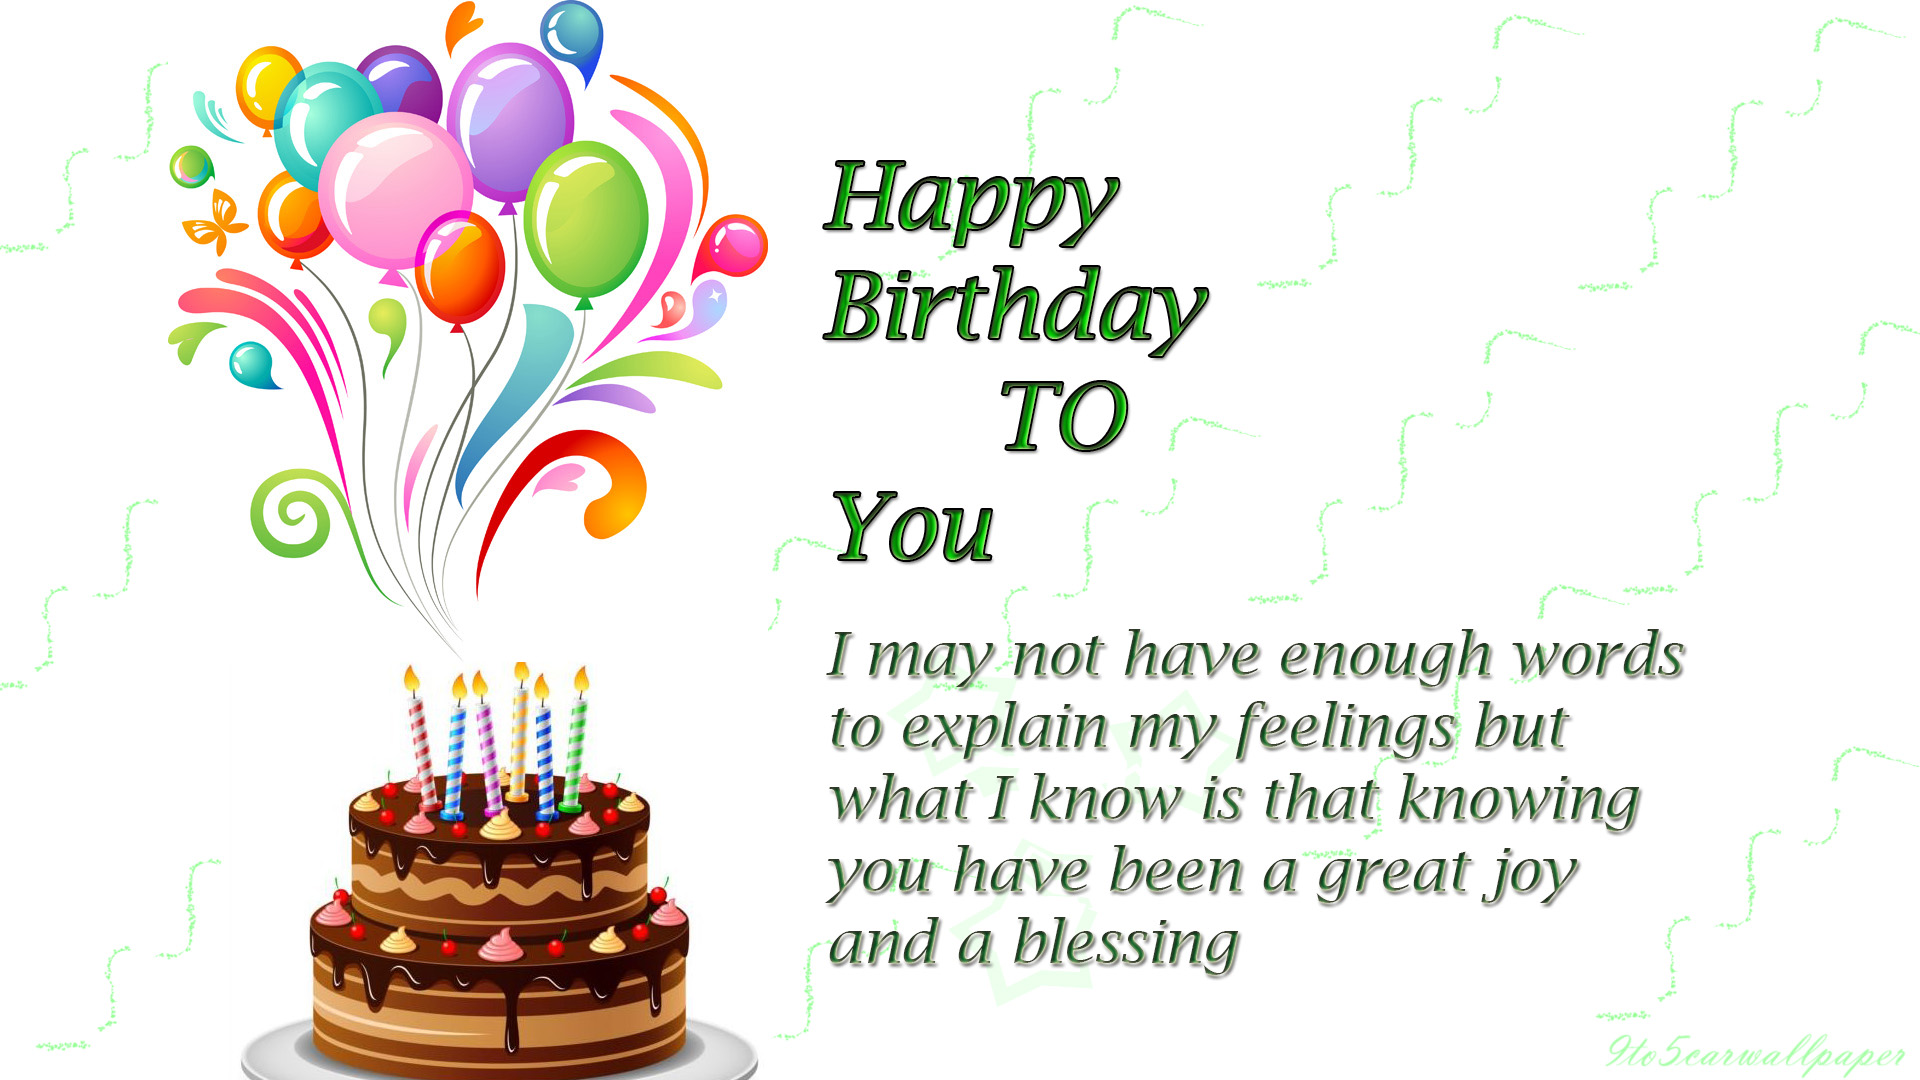 Happy Birthday Cousin Gif Images - Feel The Air | Ghatrisate